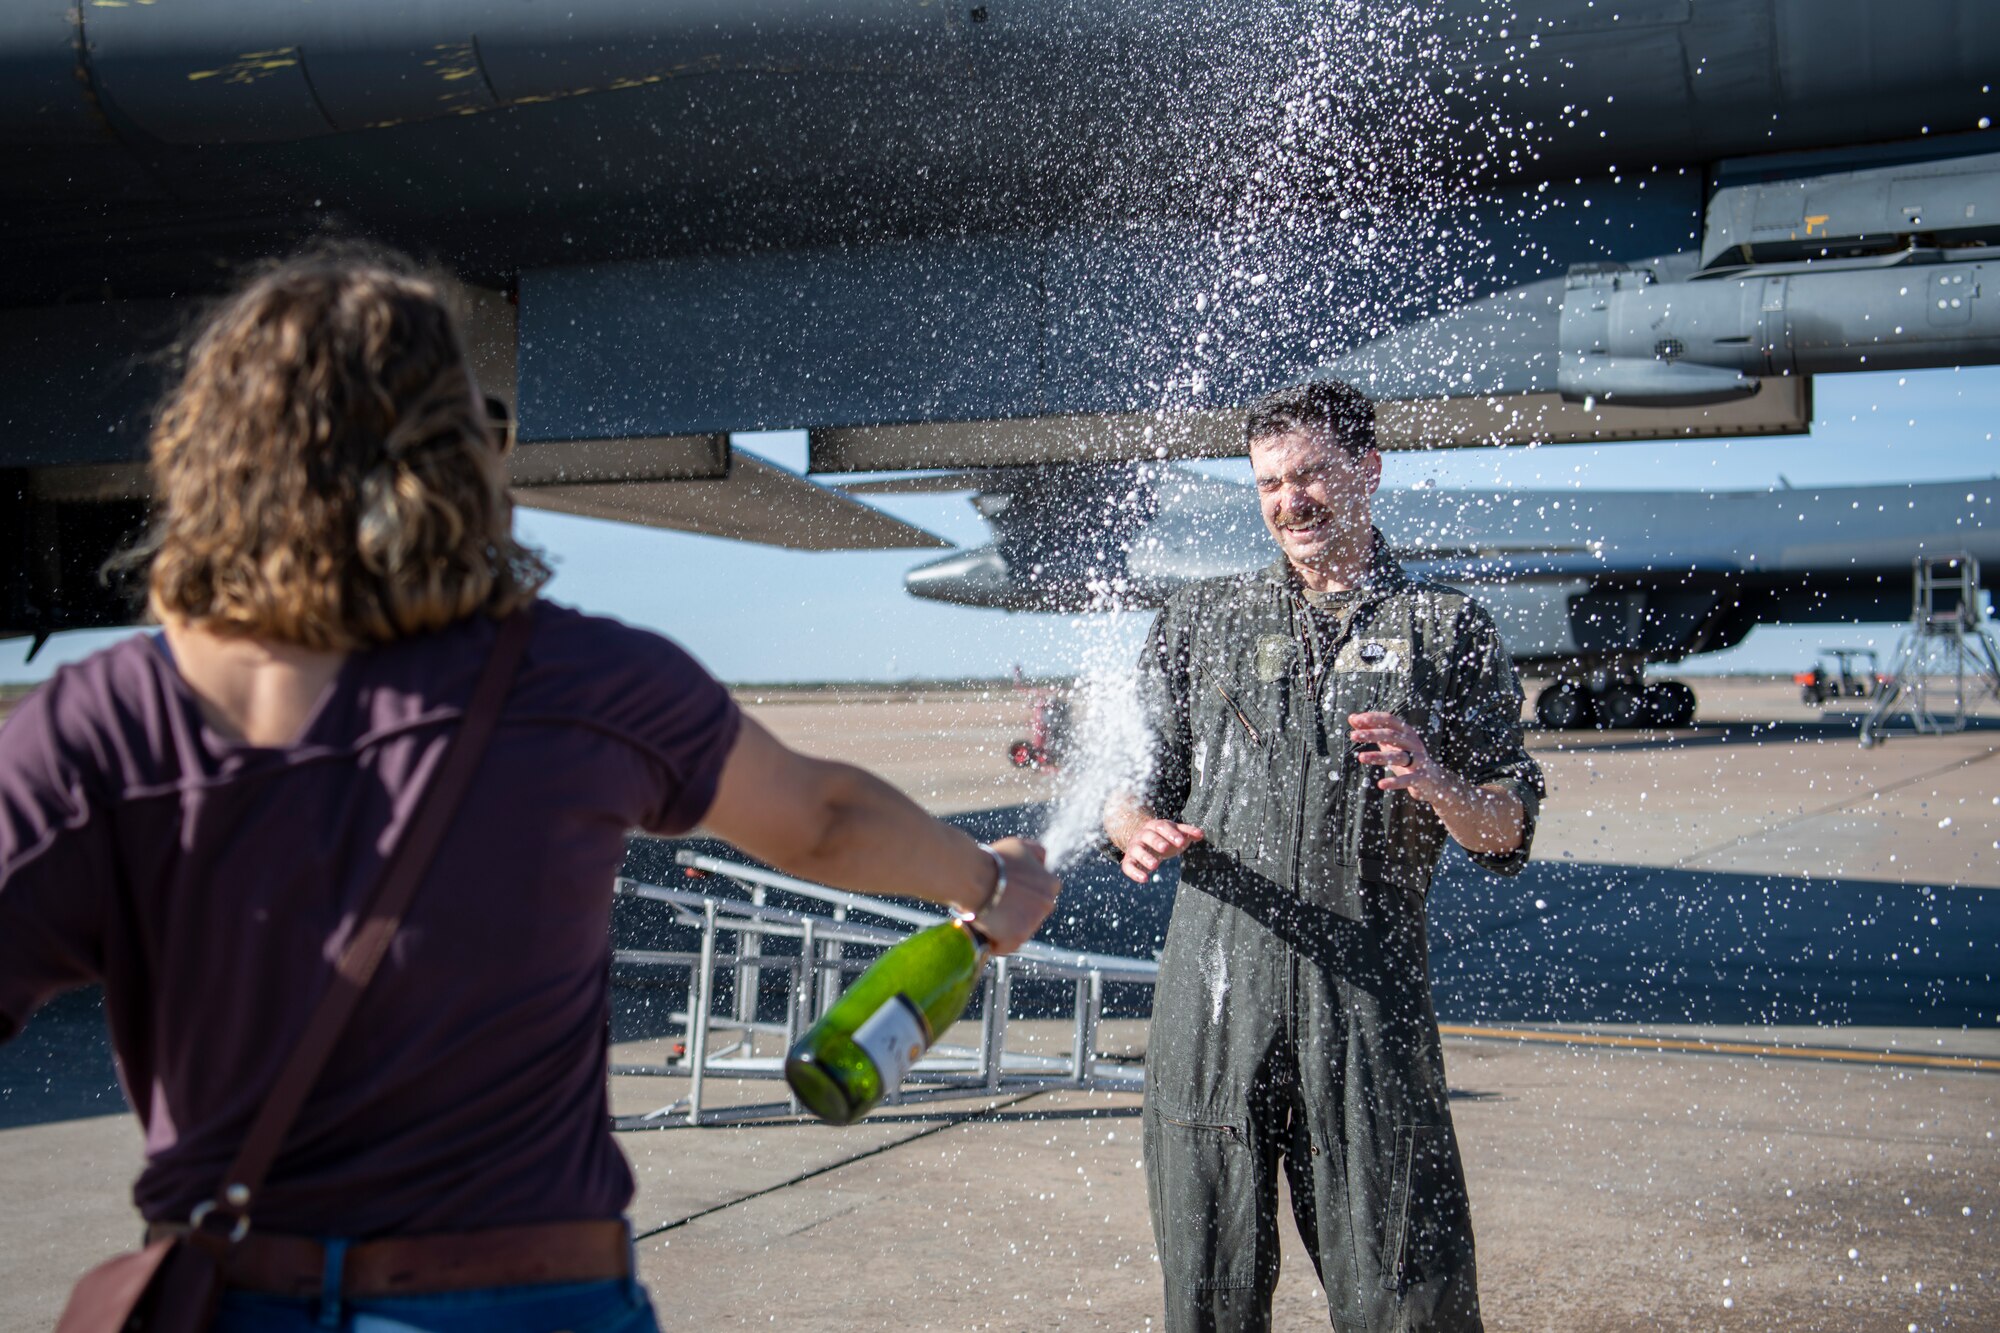 Capt. Eric Hickok, 9th Bomb Squadron pilot, is sprayed with champagne by his spouse after returning home on his last flight to Dyess Air Force Base, Texas, Nov. 14, 2021, from a Bomber Task Force Europe deployment.